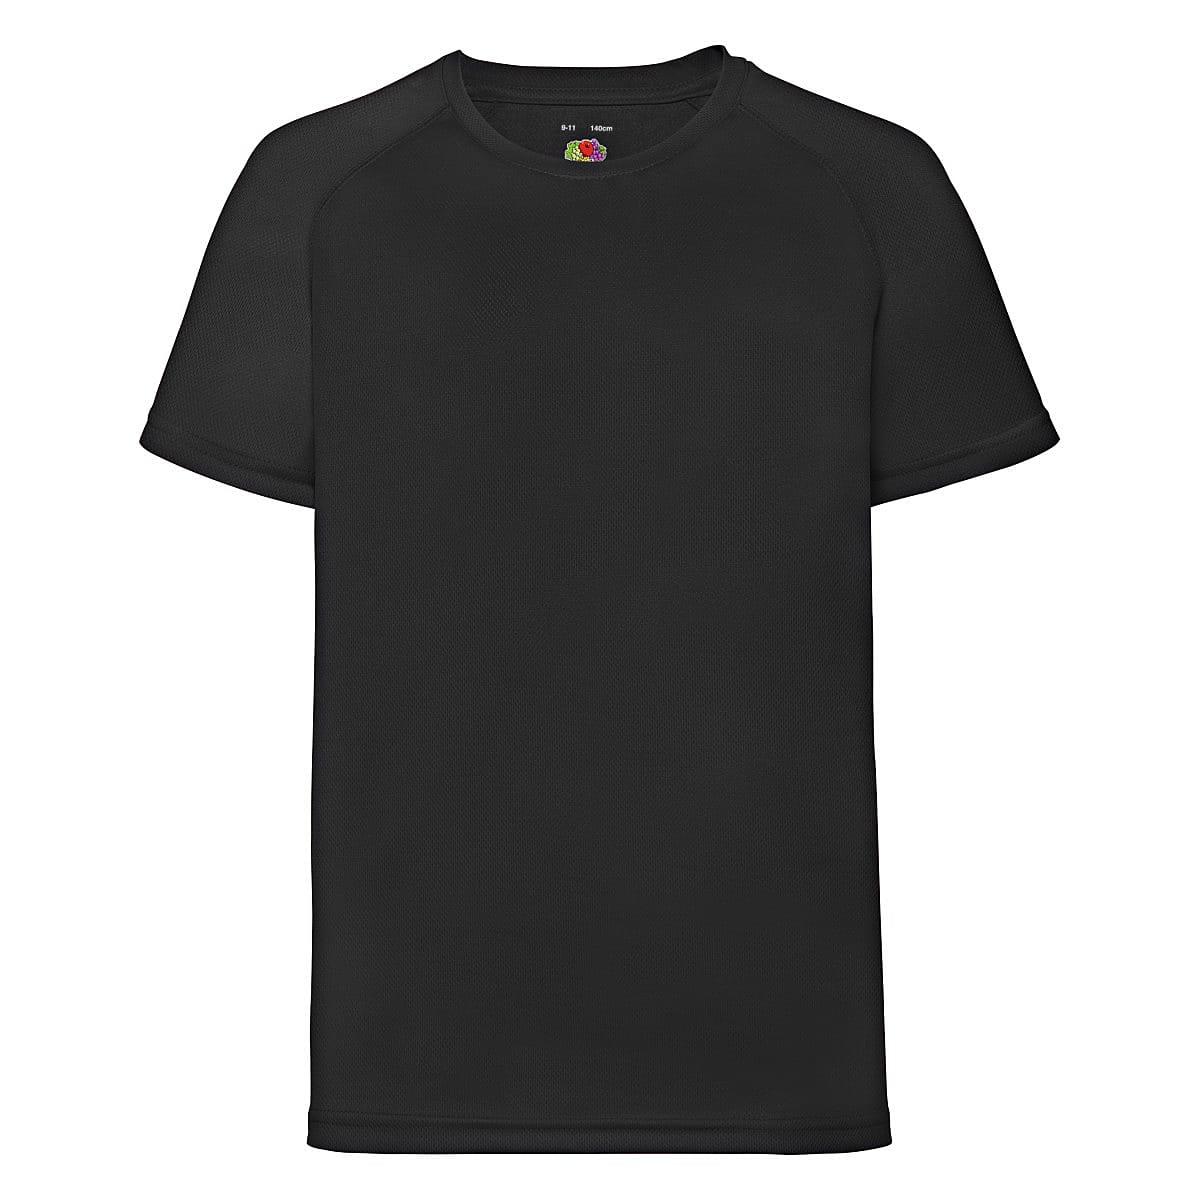 Fruit Of The Loom Childrens Kids Performance T-Shirt in Black (Product Code: 61013)